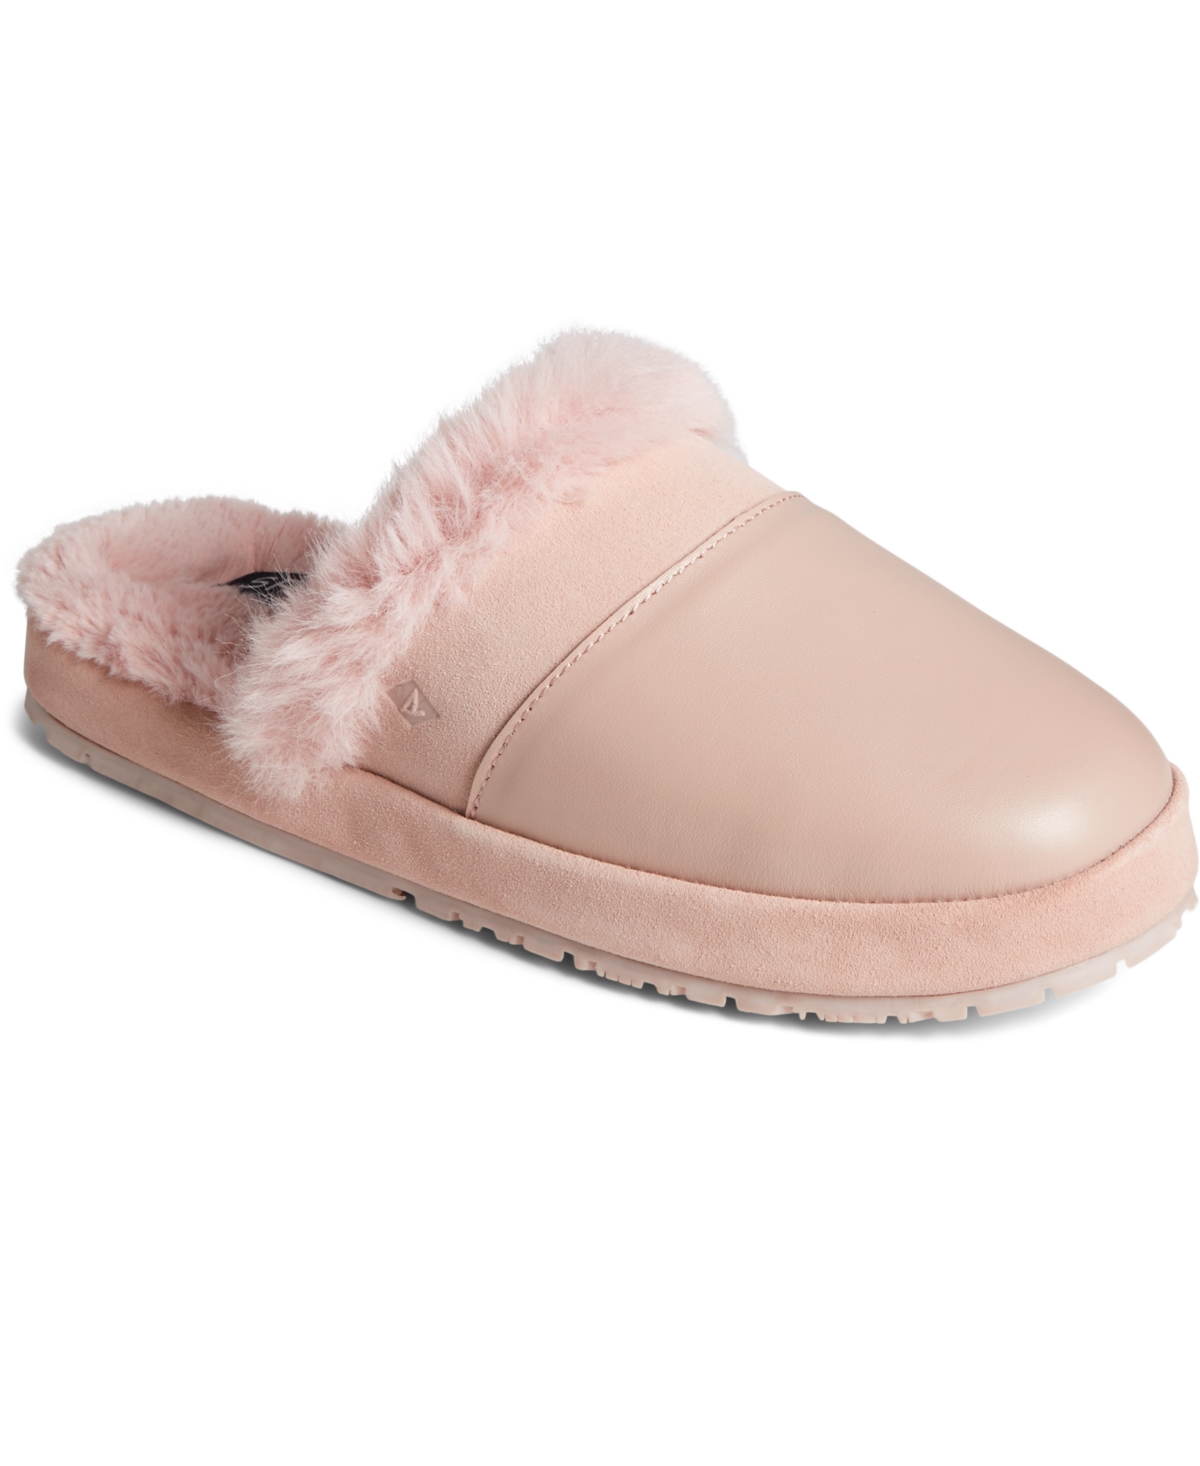 Sperry Women's Cape May Mule Slippers In Rose